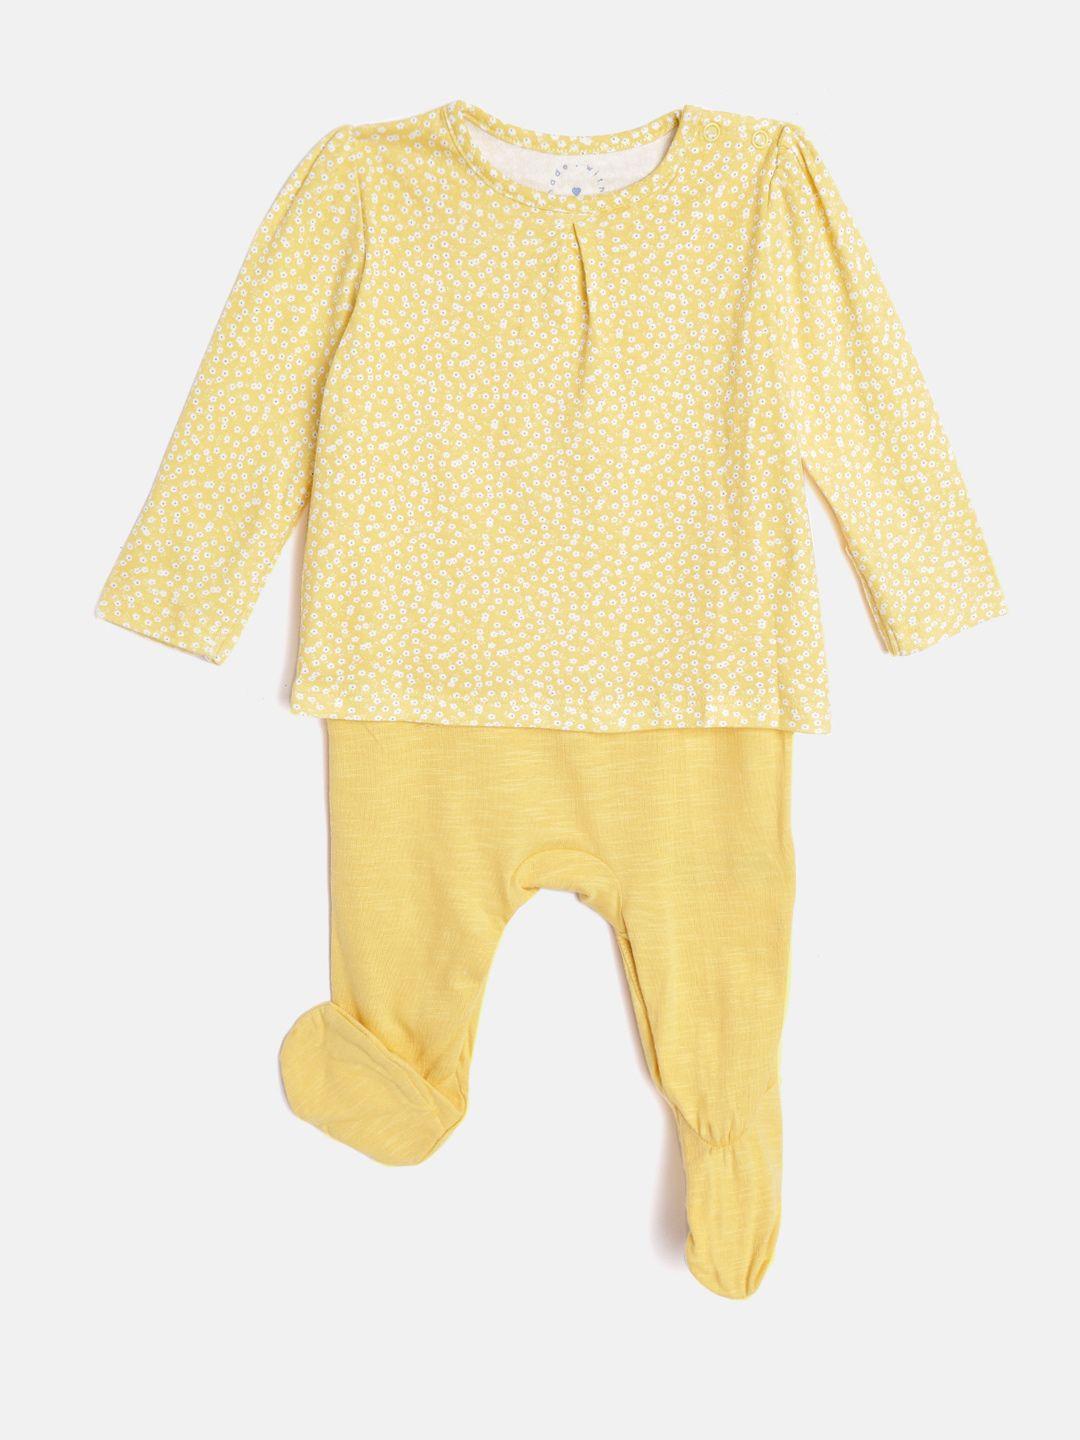 mothercare infant girls yellow & white floral print layered pure cotton sleepsuit